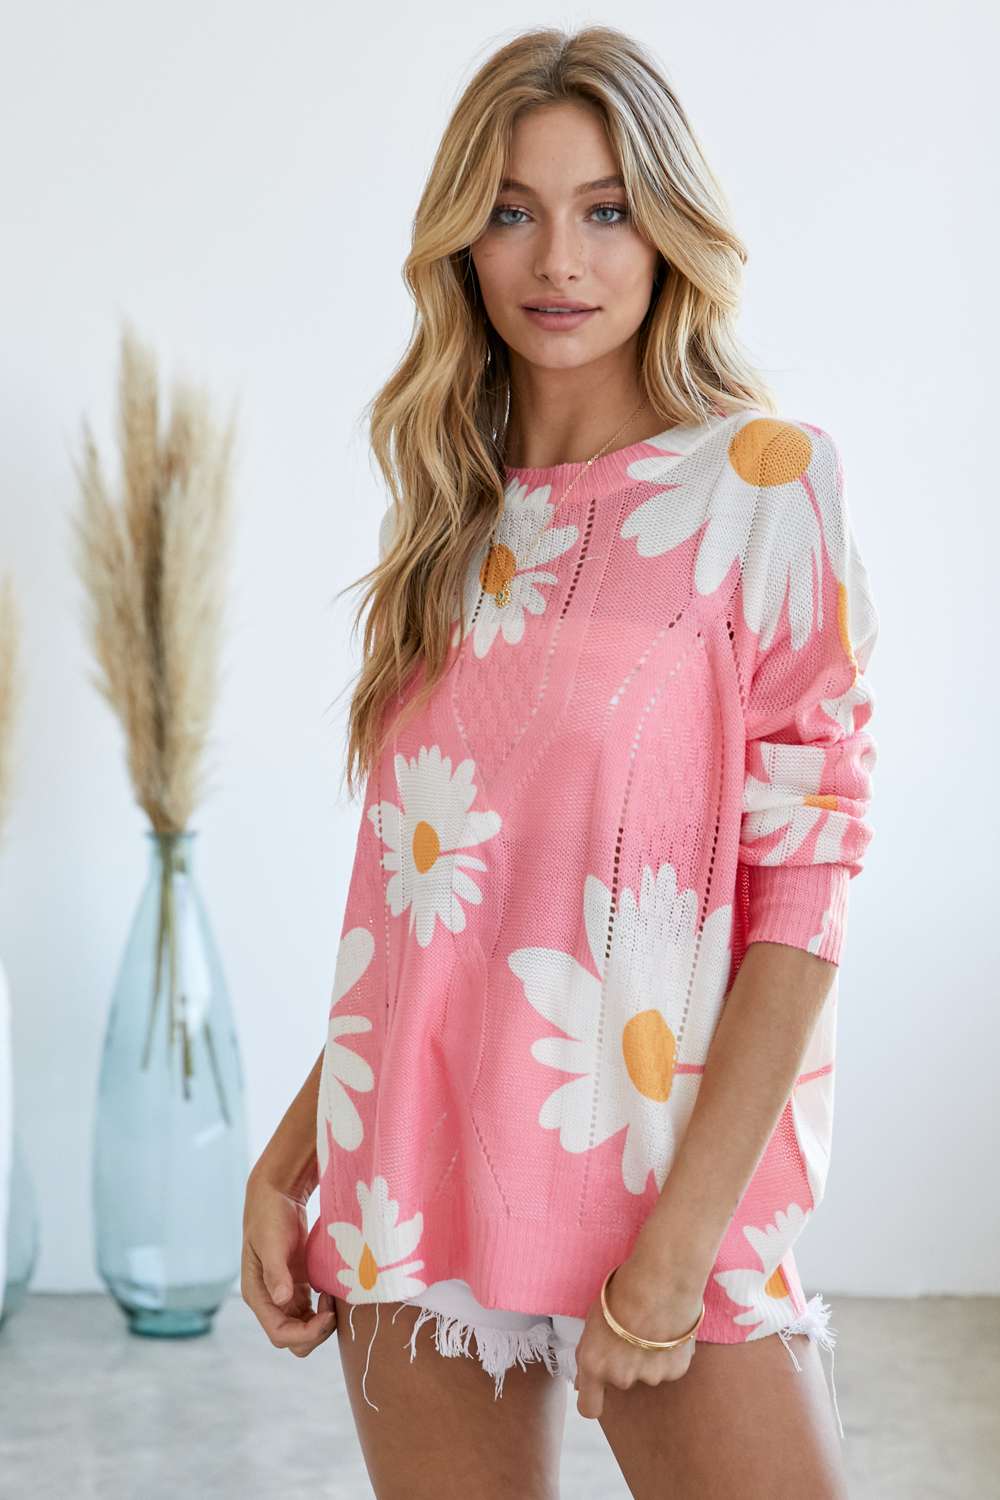 Daisy Mae Floral Sweater in Blush Pink